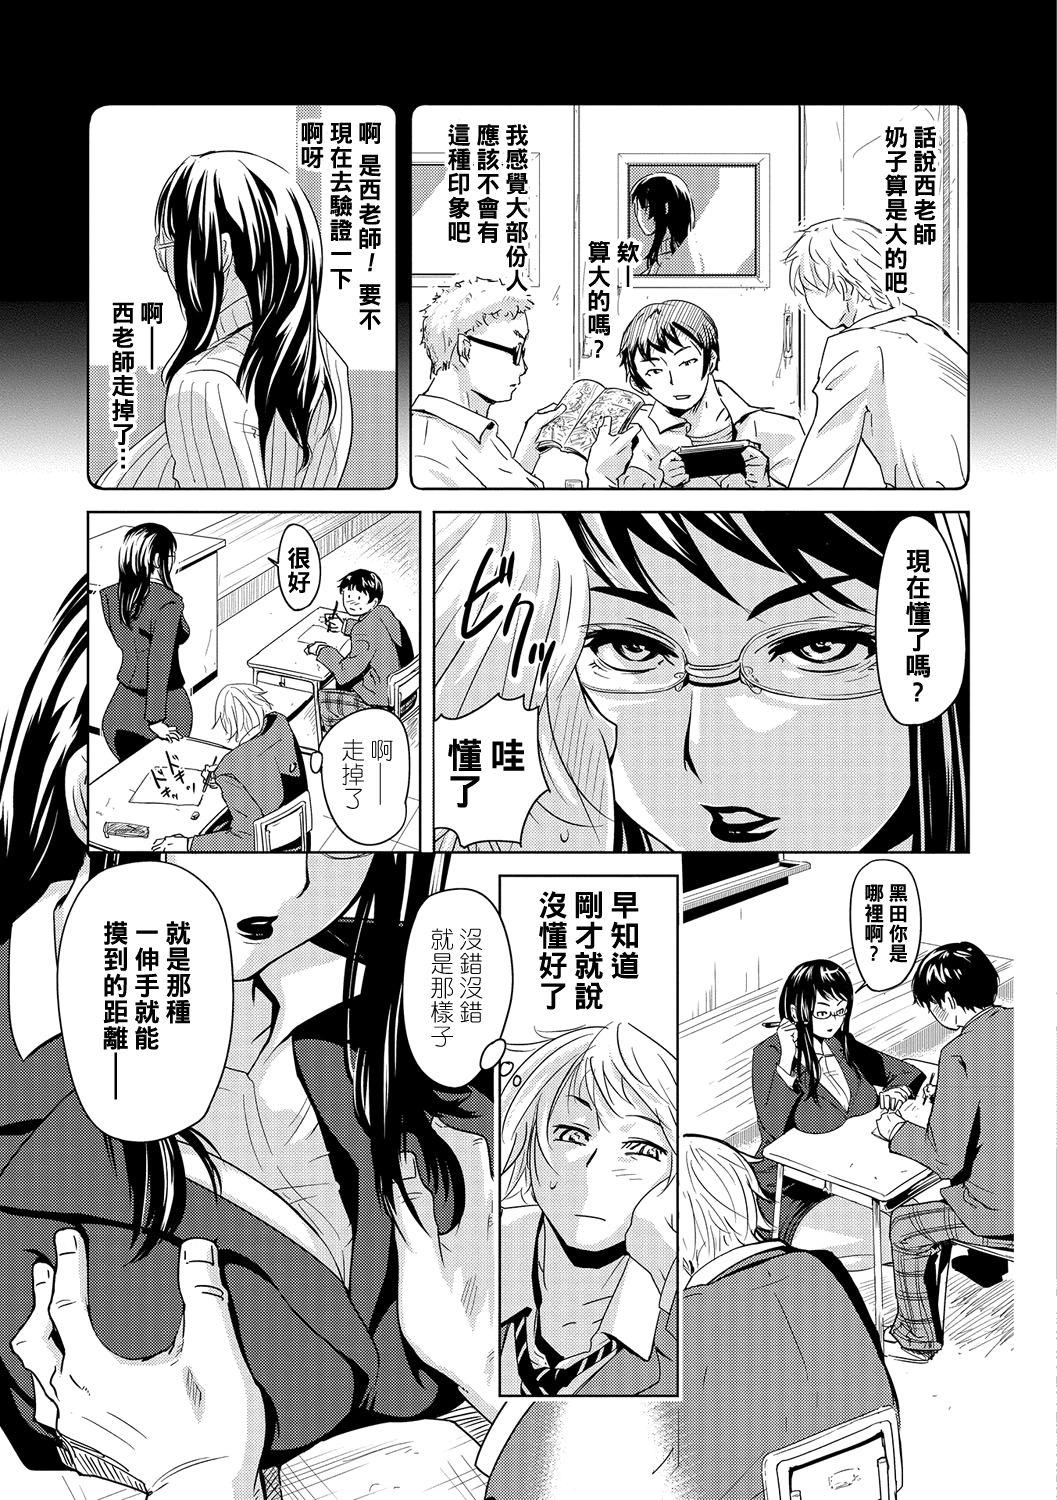 Ano 補習戦略～西彩子先生の場合～（Chinese） Socks - Page 3